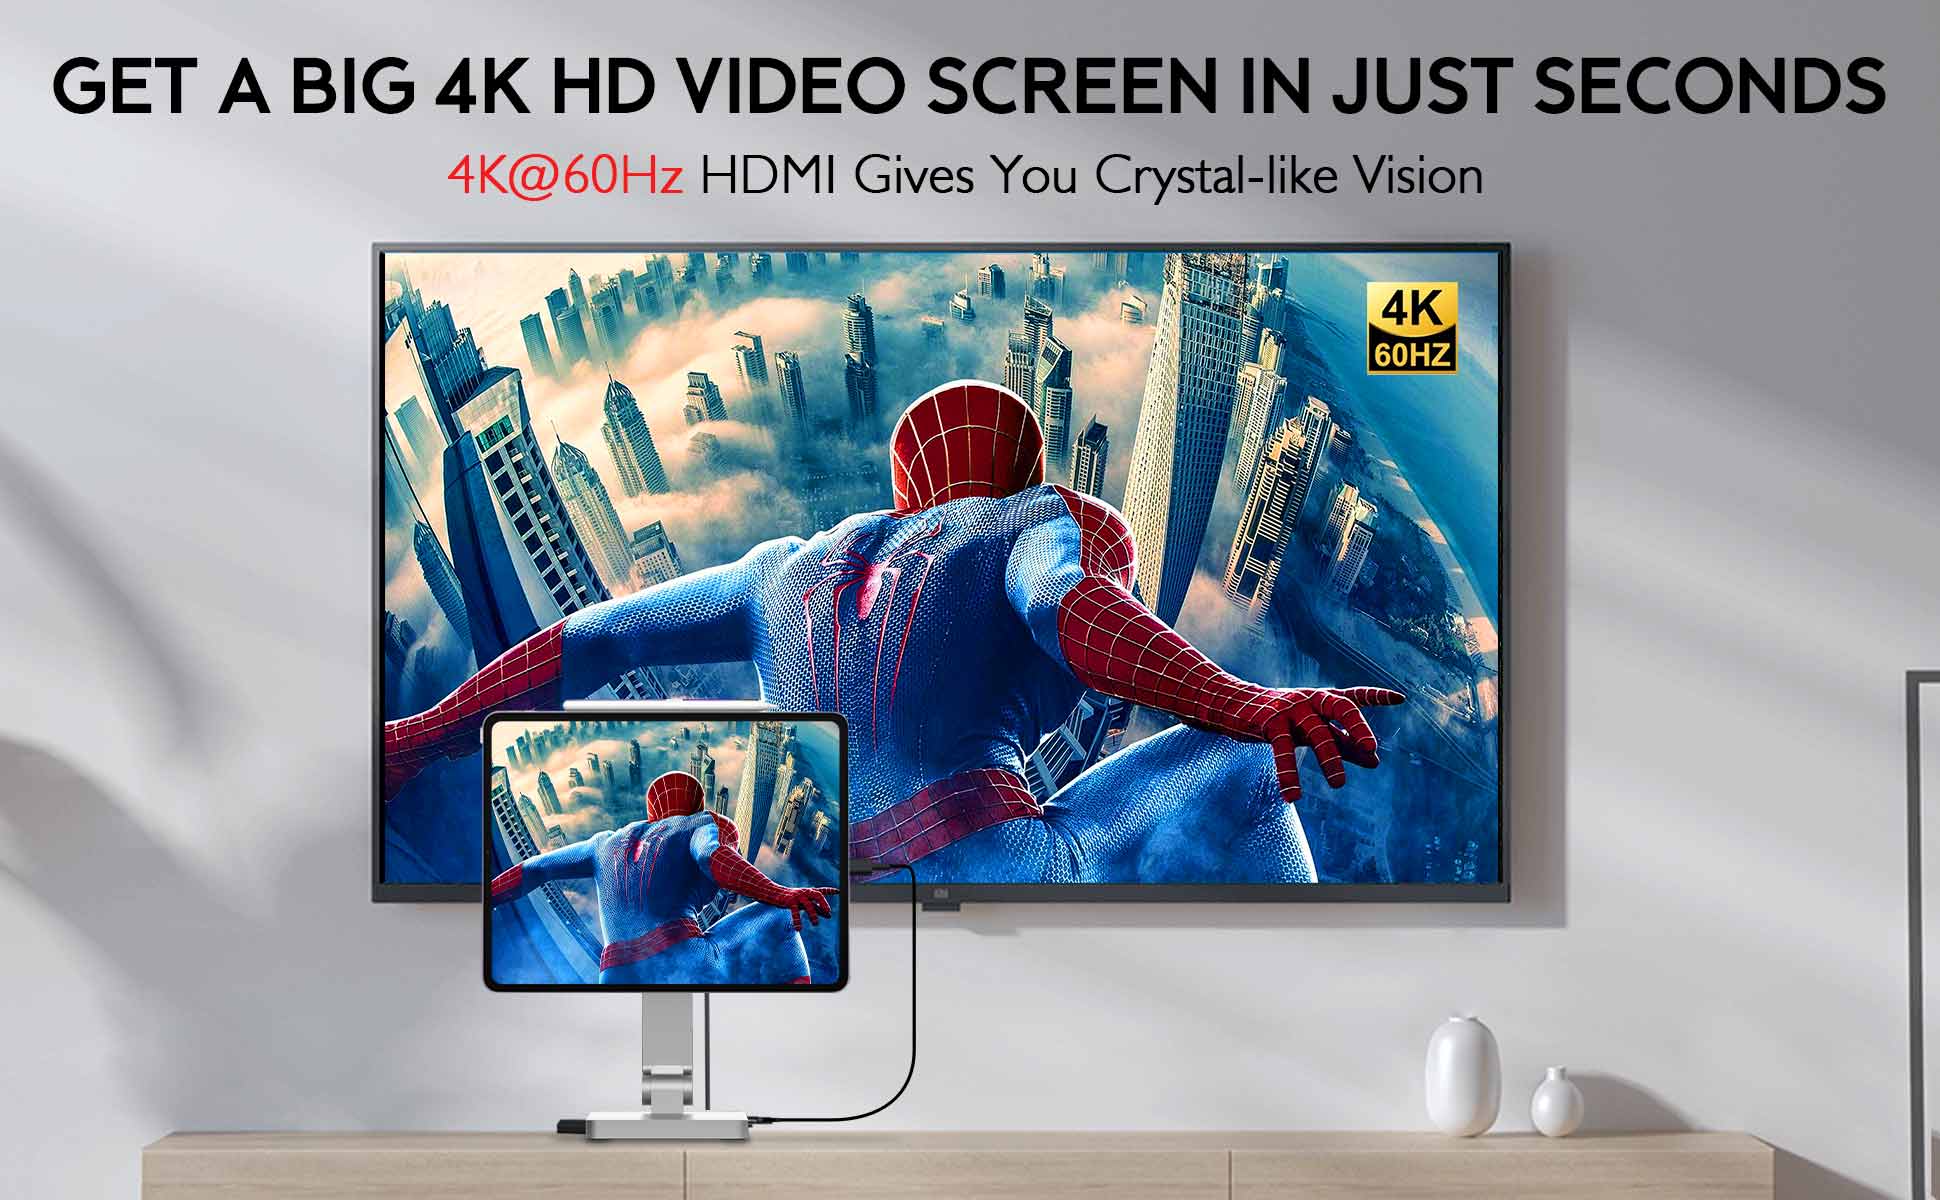 magfit-ipad-dock-stand-with-4k@60hz-hdmi-gives-you-crystal-like-vision